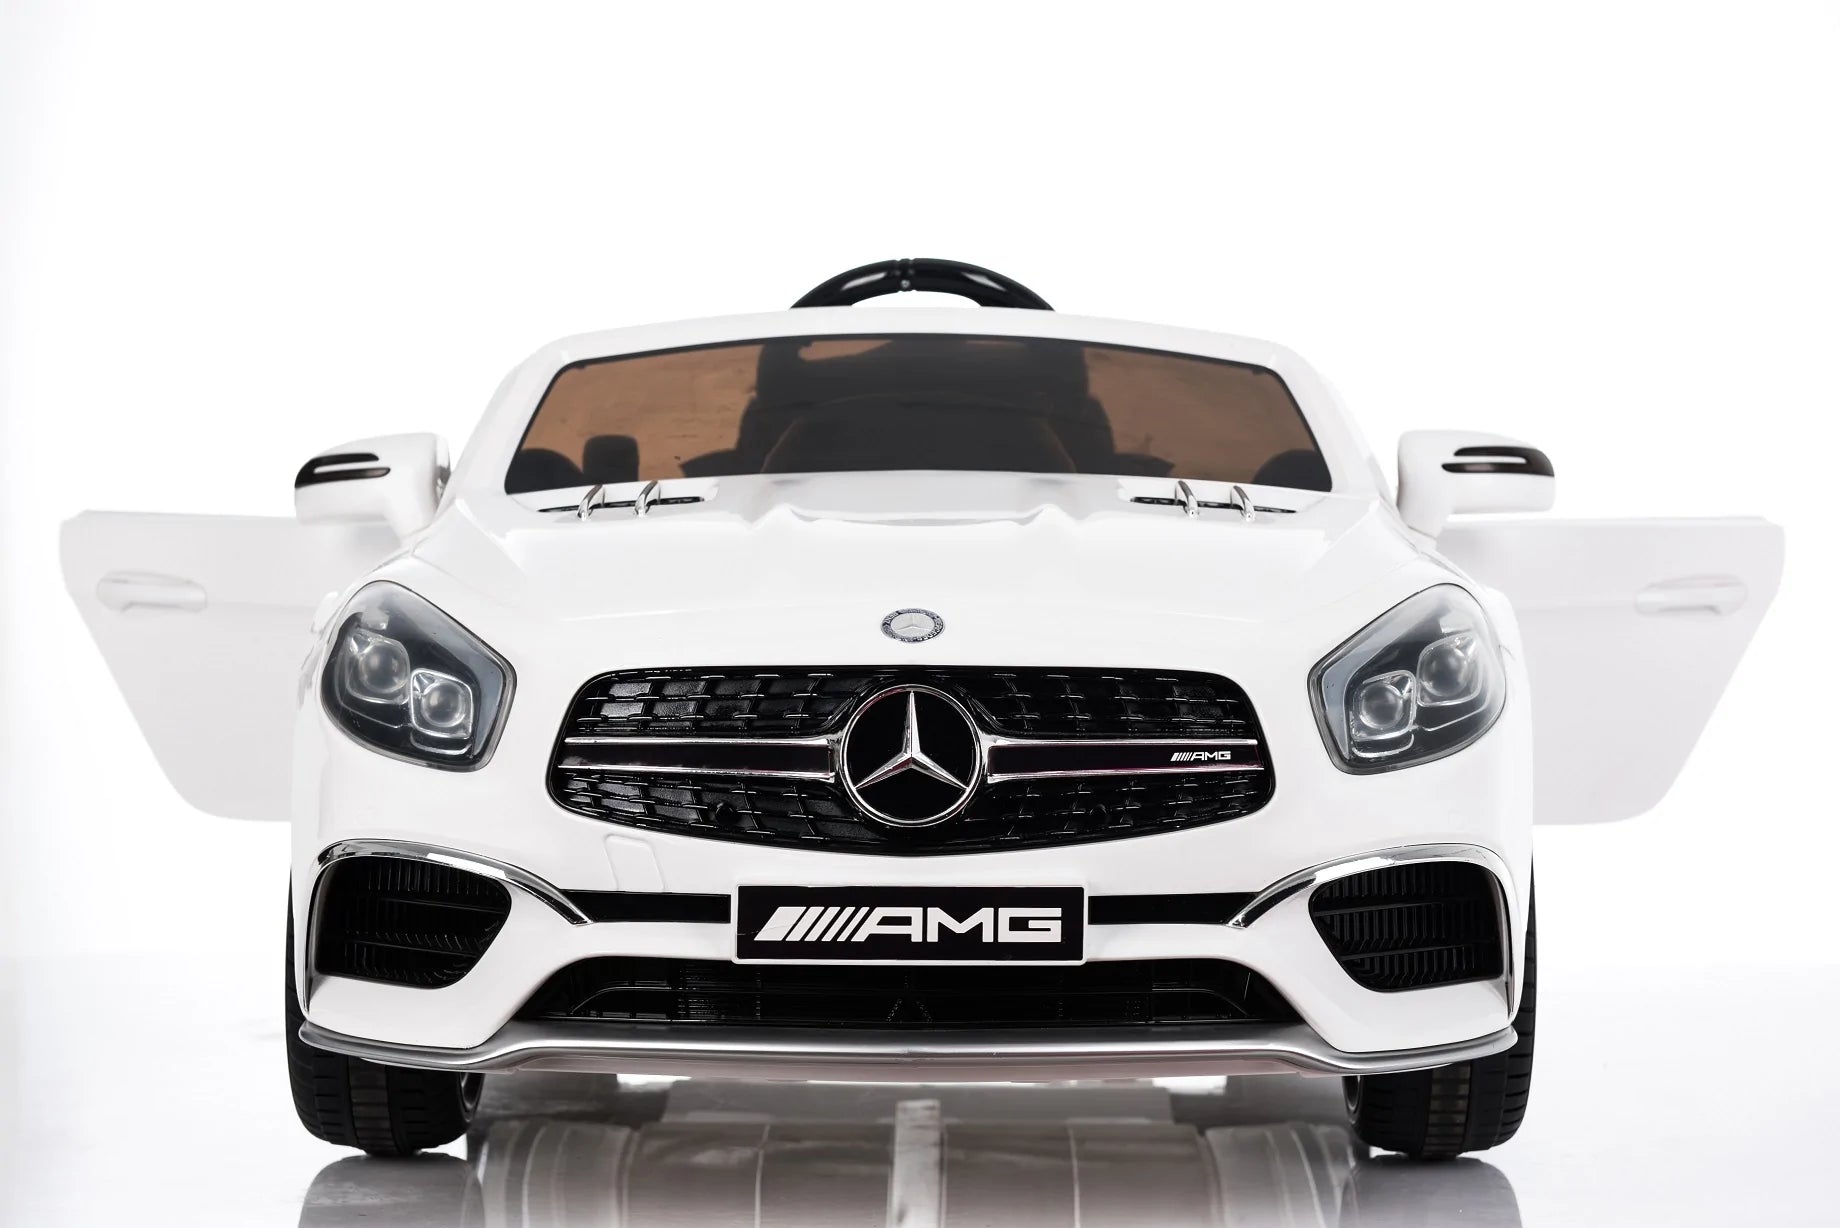 Kids Mercedes SL65 AMG E-Car With Remote Control (Licensed)